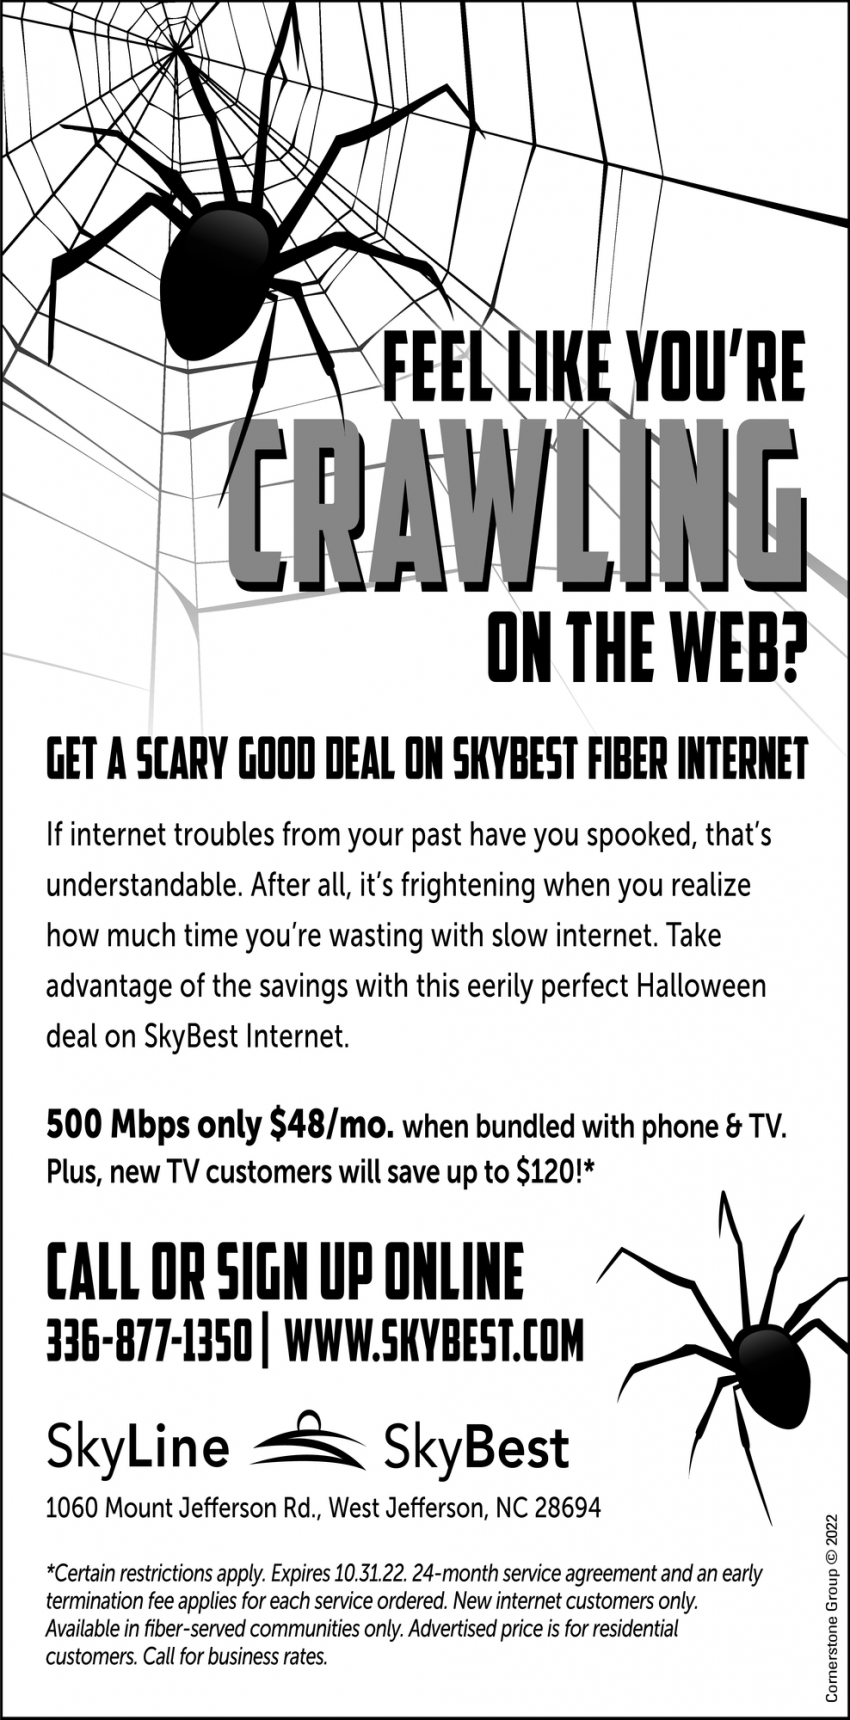 Feel Like You're Crawling On The Web?